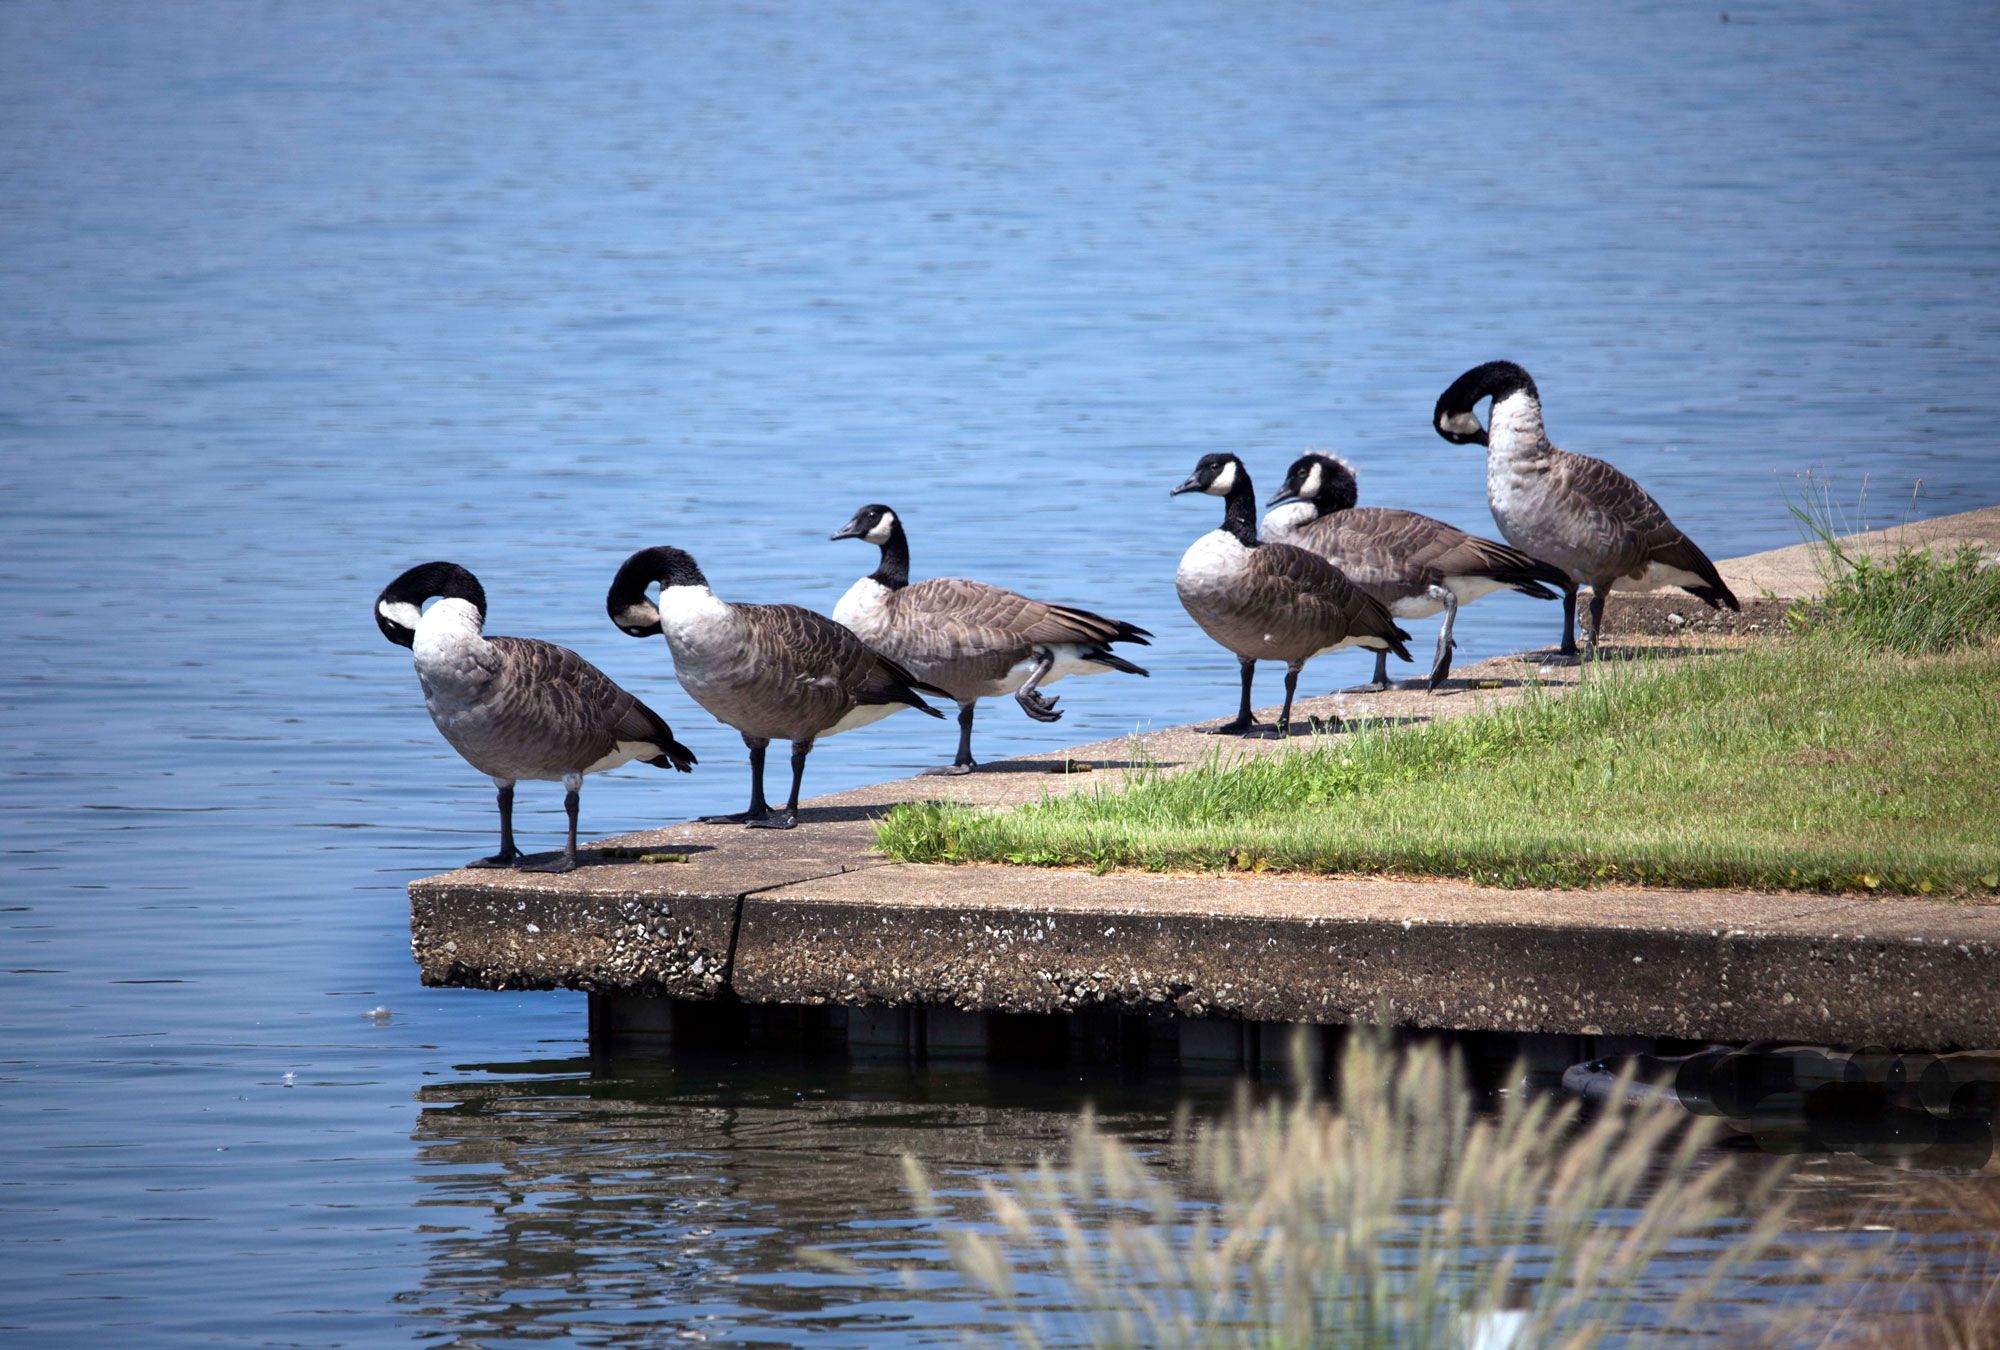 Six geese standing on a wall